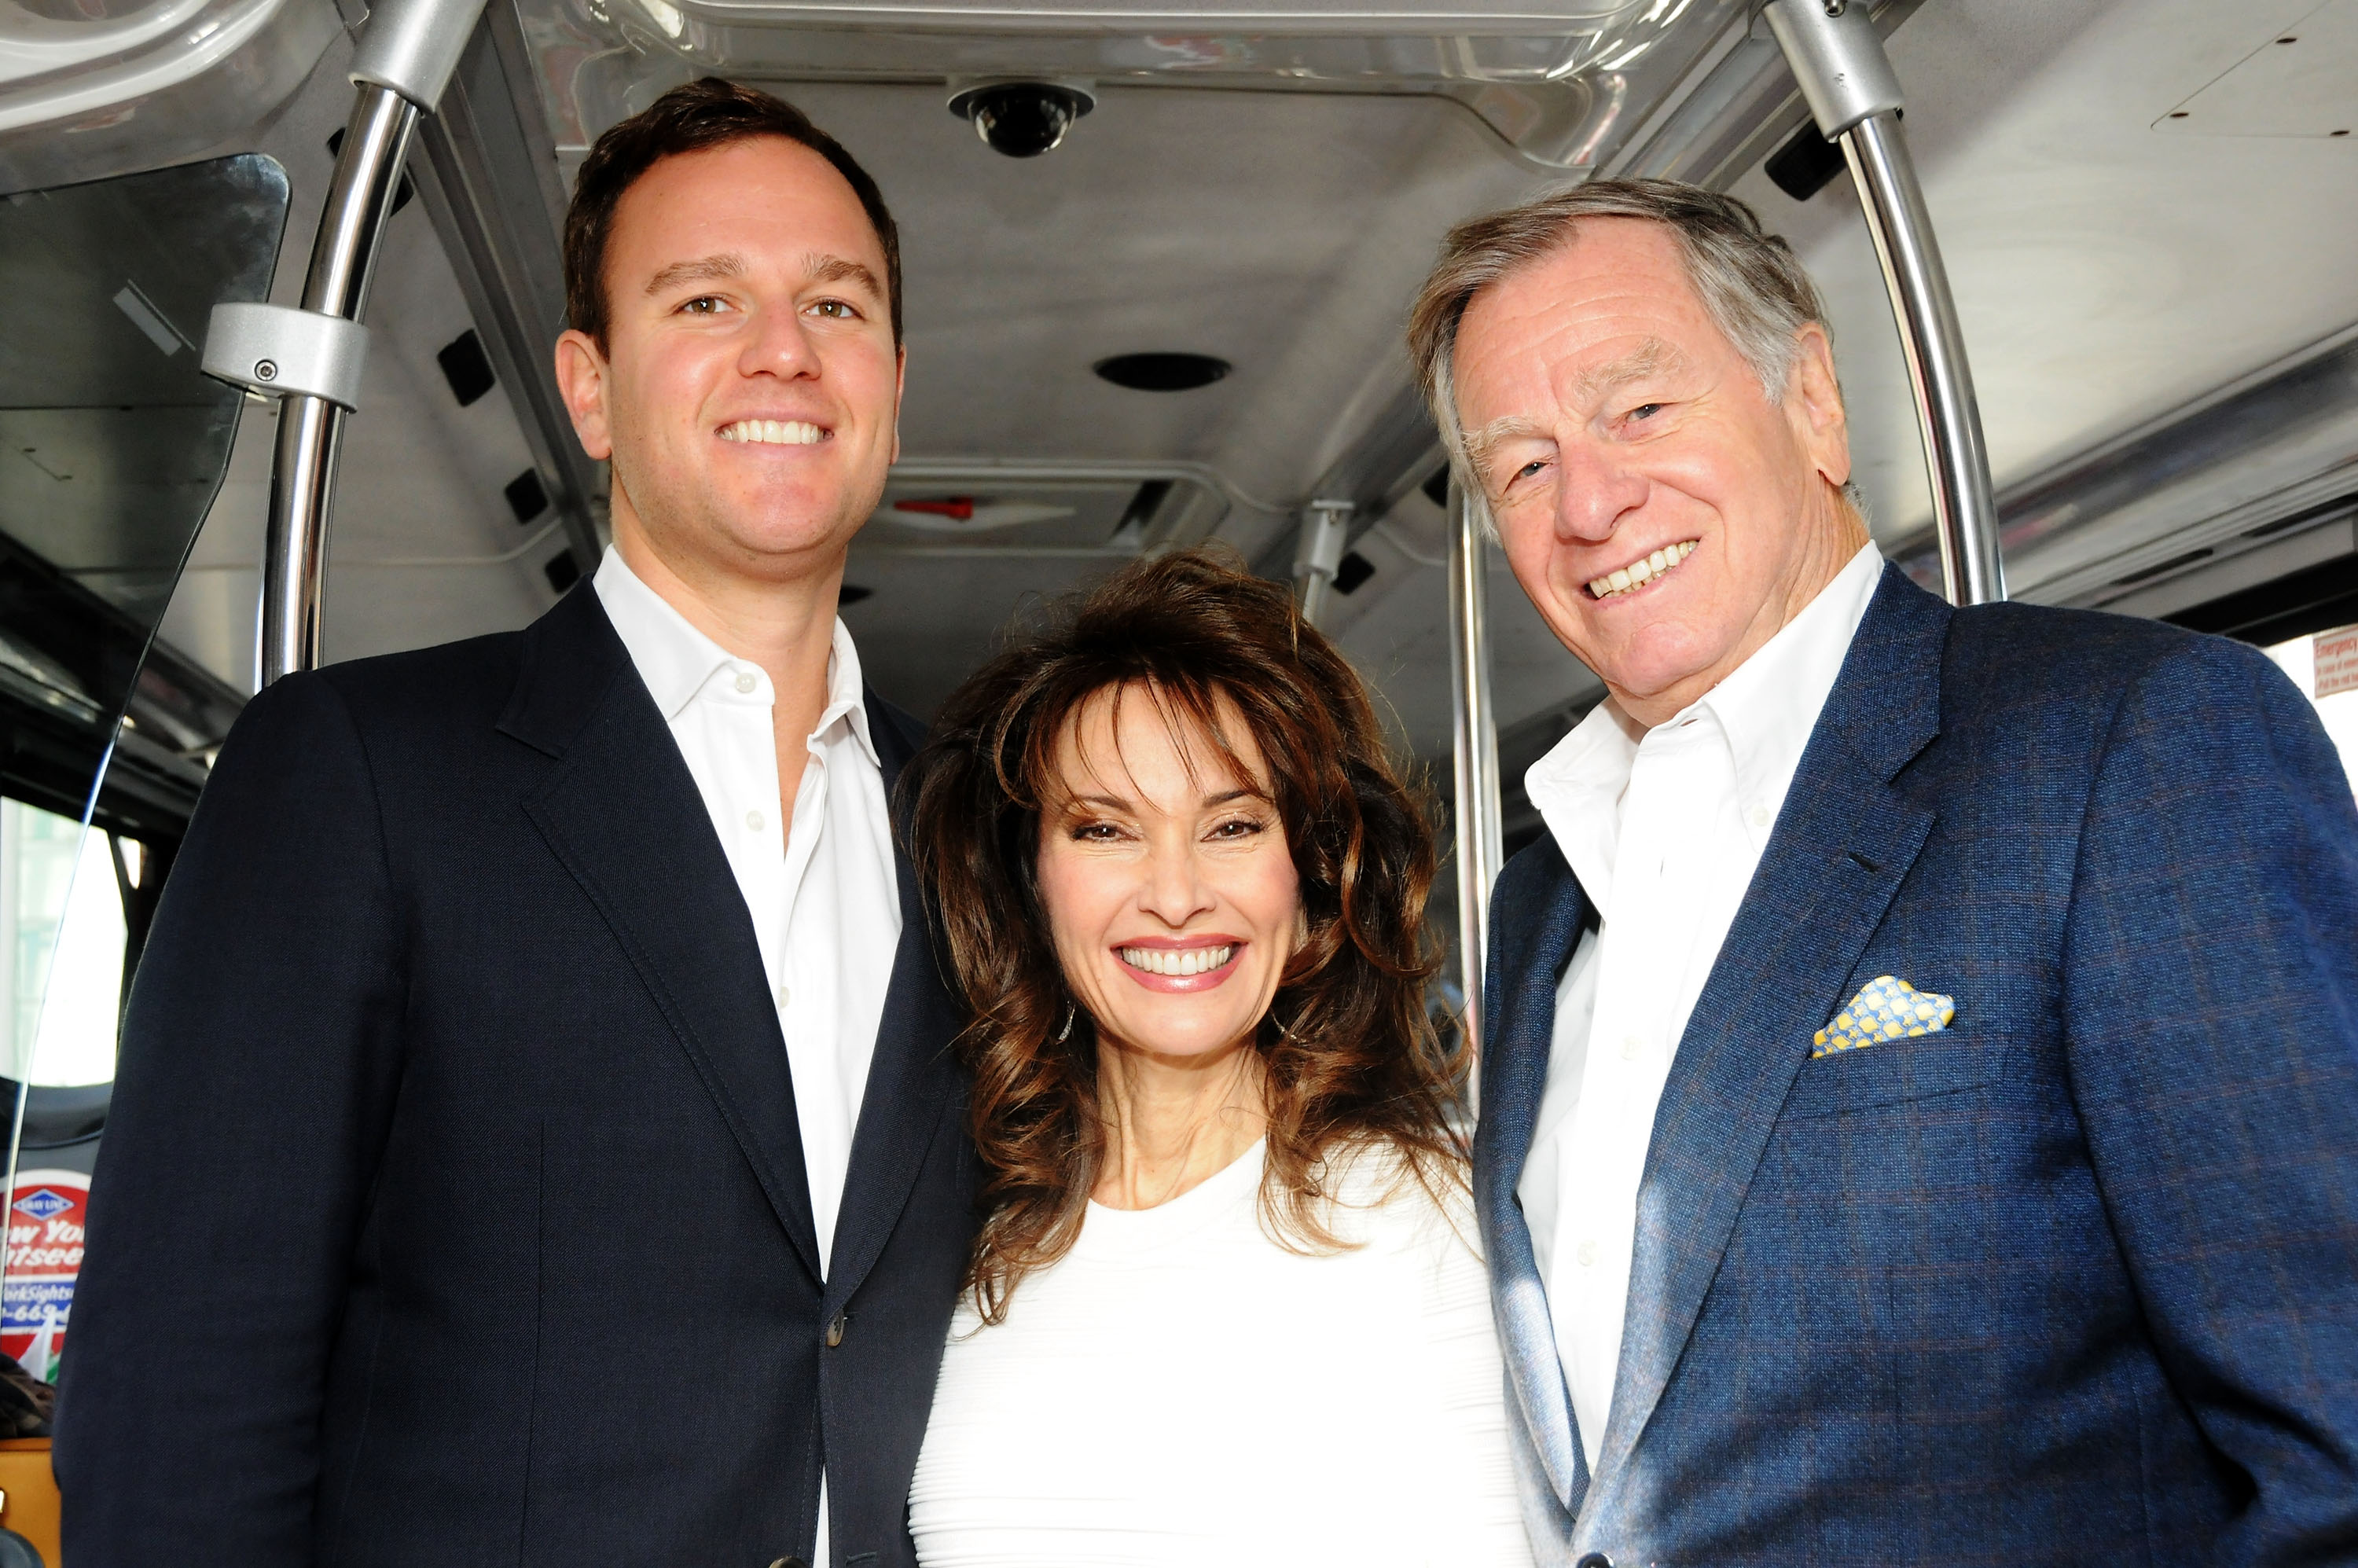 Susan Lucci (center), accompanied by her son Andreas Huber (left) and husband Helmut Huber (right), attending Gray Line New York's Ride Of Fame Honors Susan Lucci at Pier 78 in New York City on November 19, 2013 | Source: Getty Images